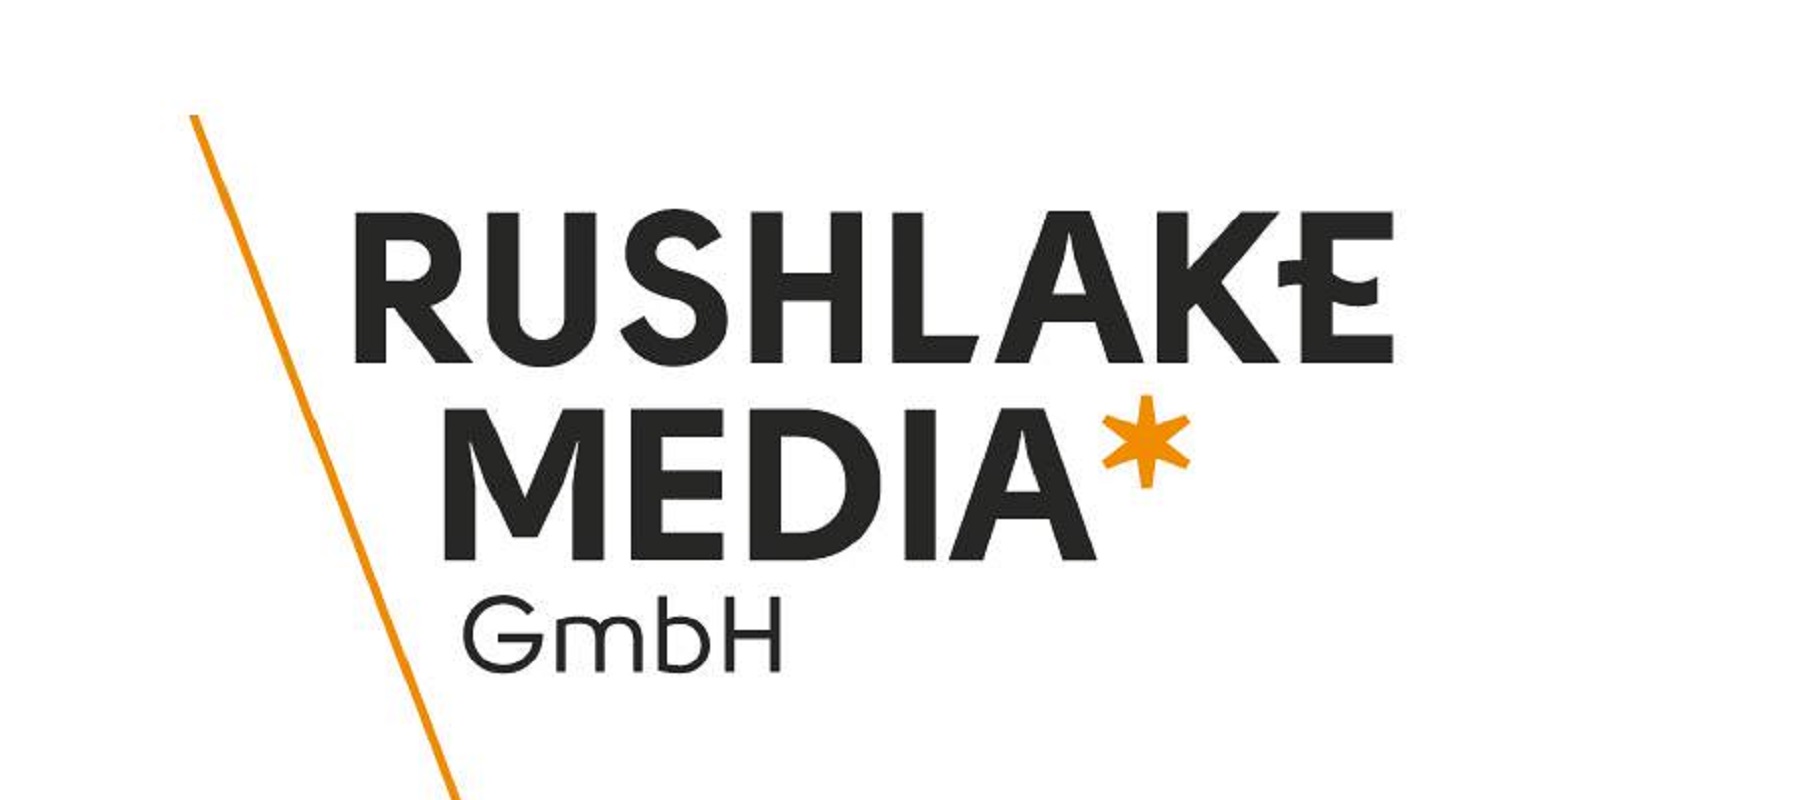 Rushlake Media announces the launch of African FAST channel on Mansa